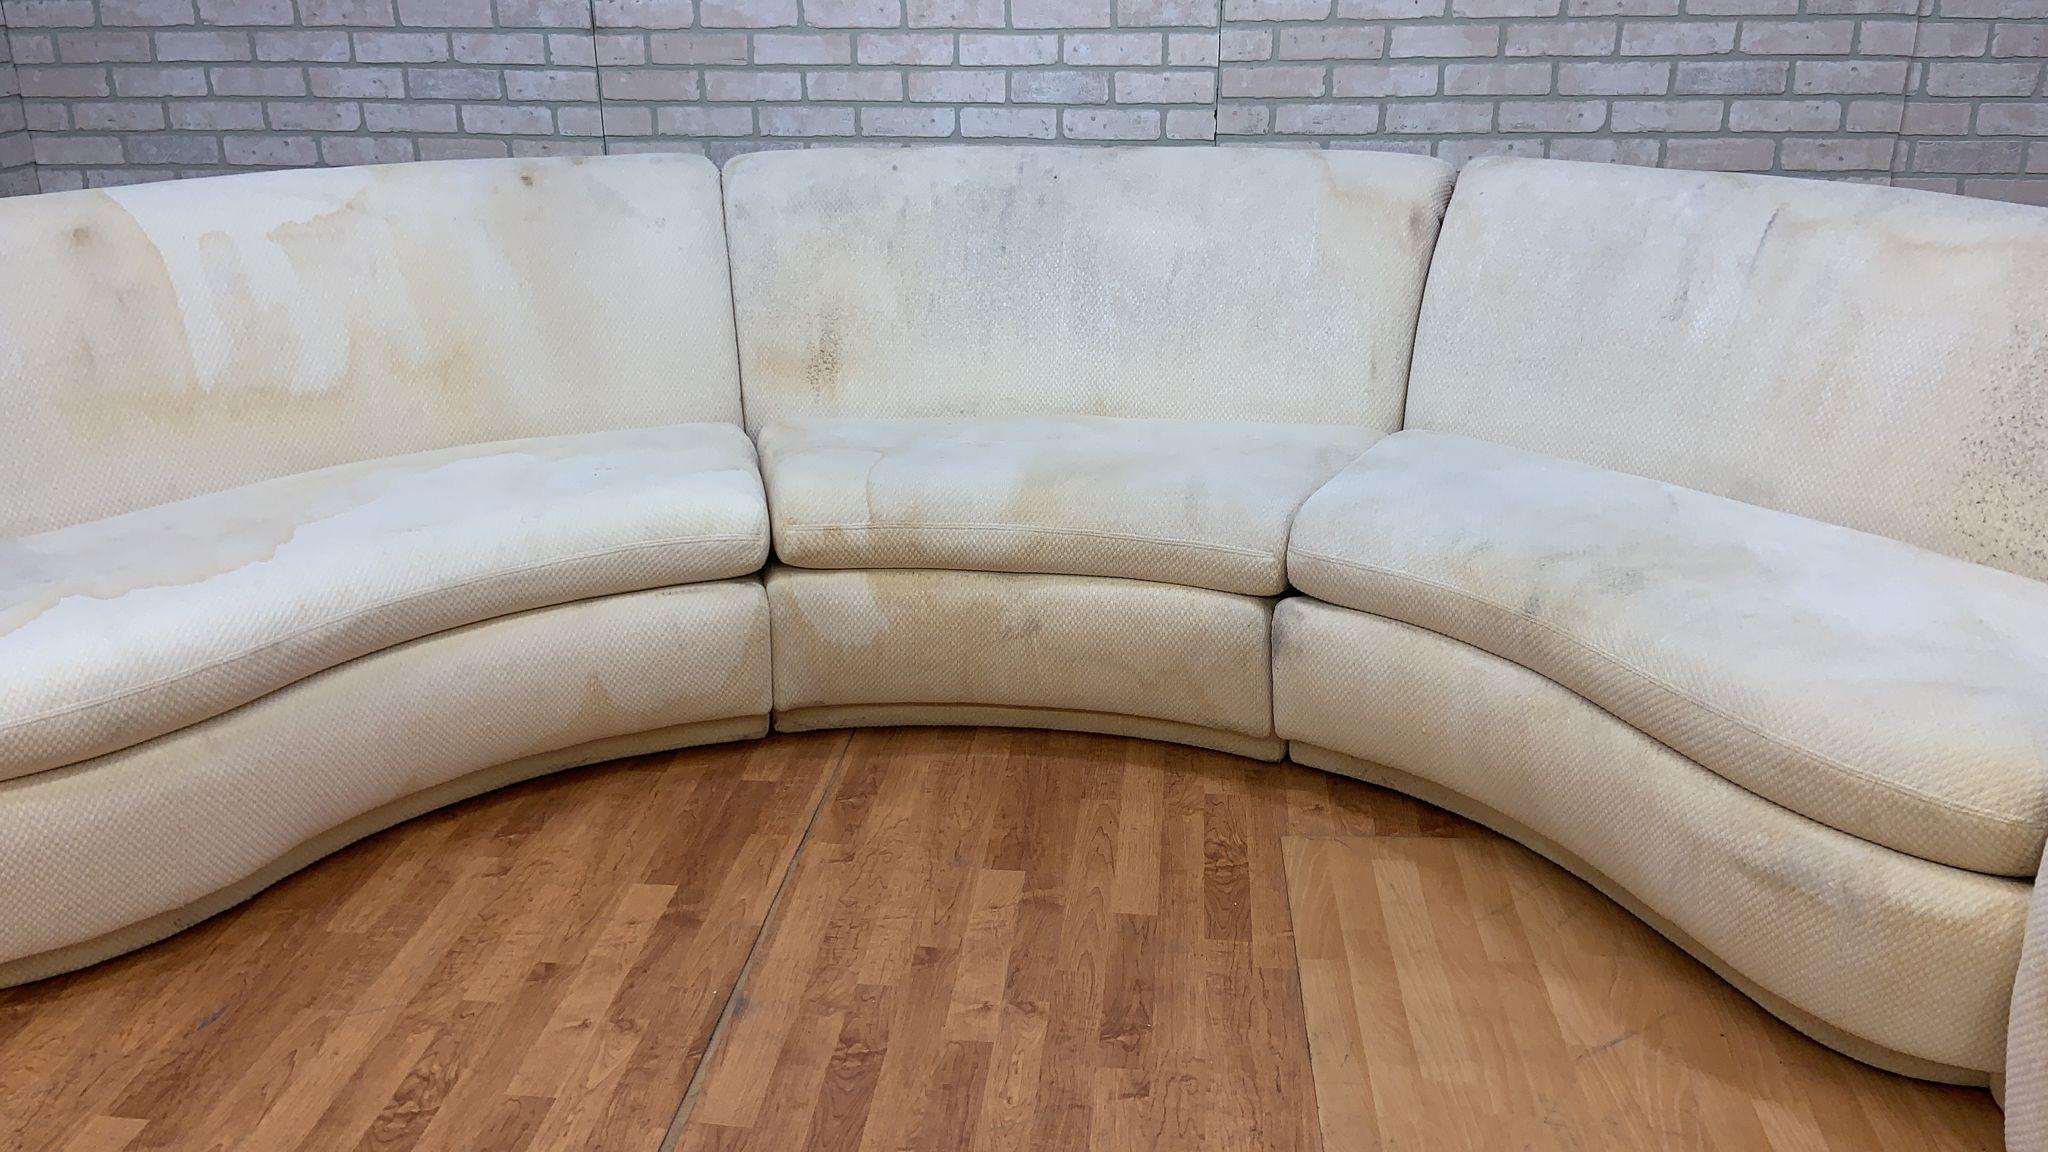 Late 20th Century Mid Century Modern Vladimir Kagan Style 3 Piece Curved Sectional Sofa  For Sale